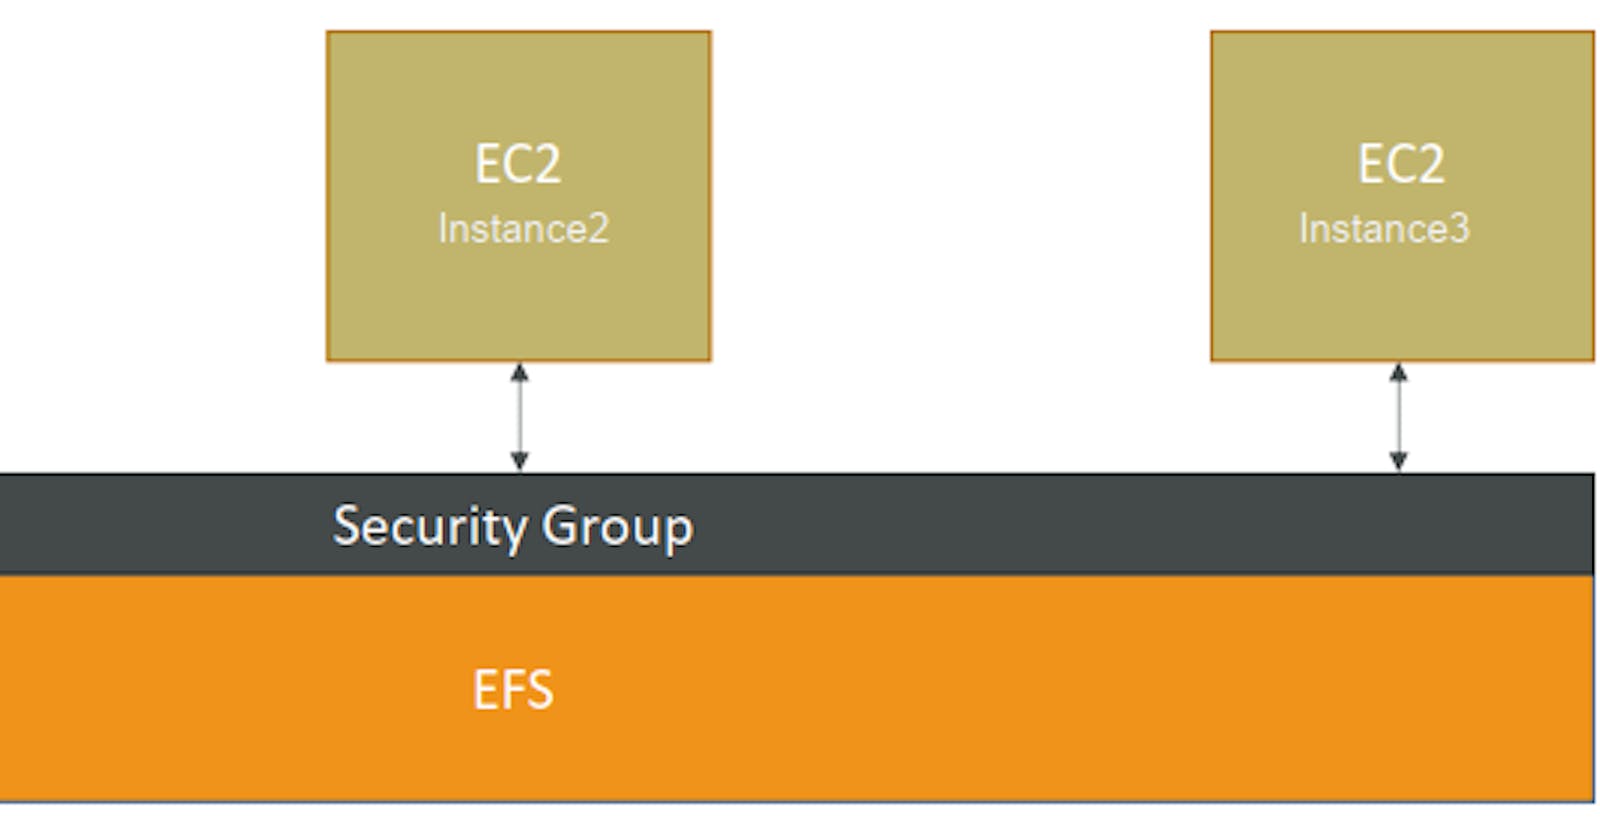 Create an EFS and connect it to 3 different EC2 instances